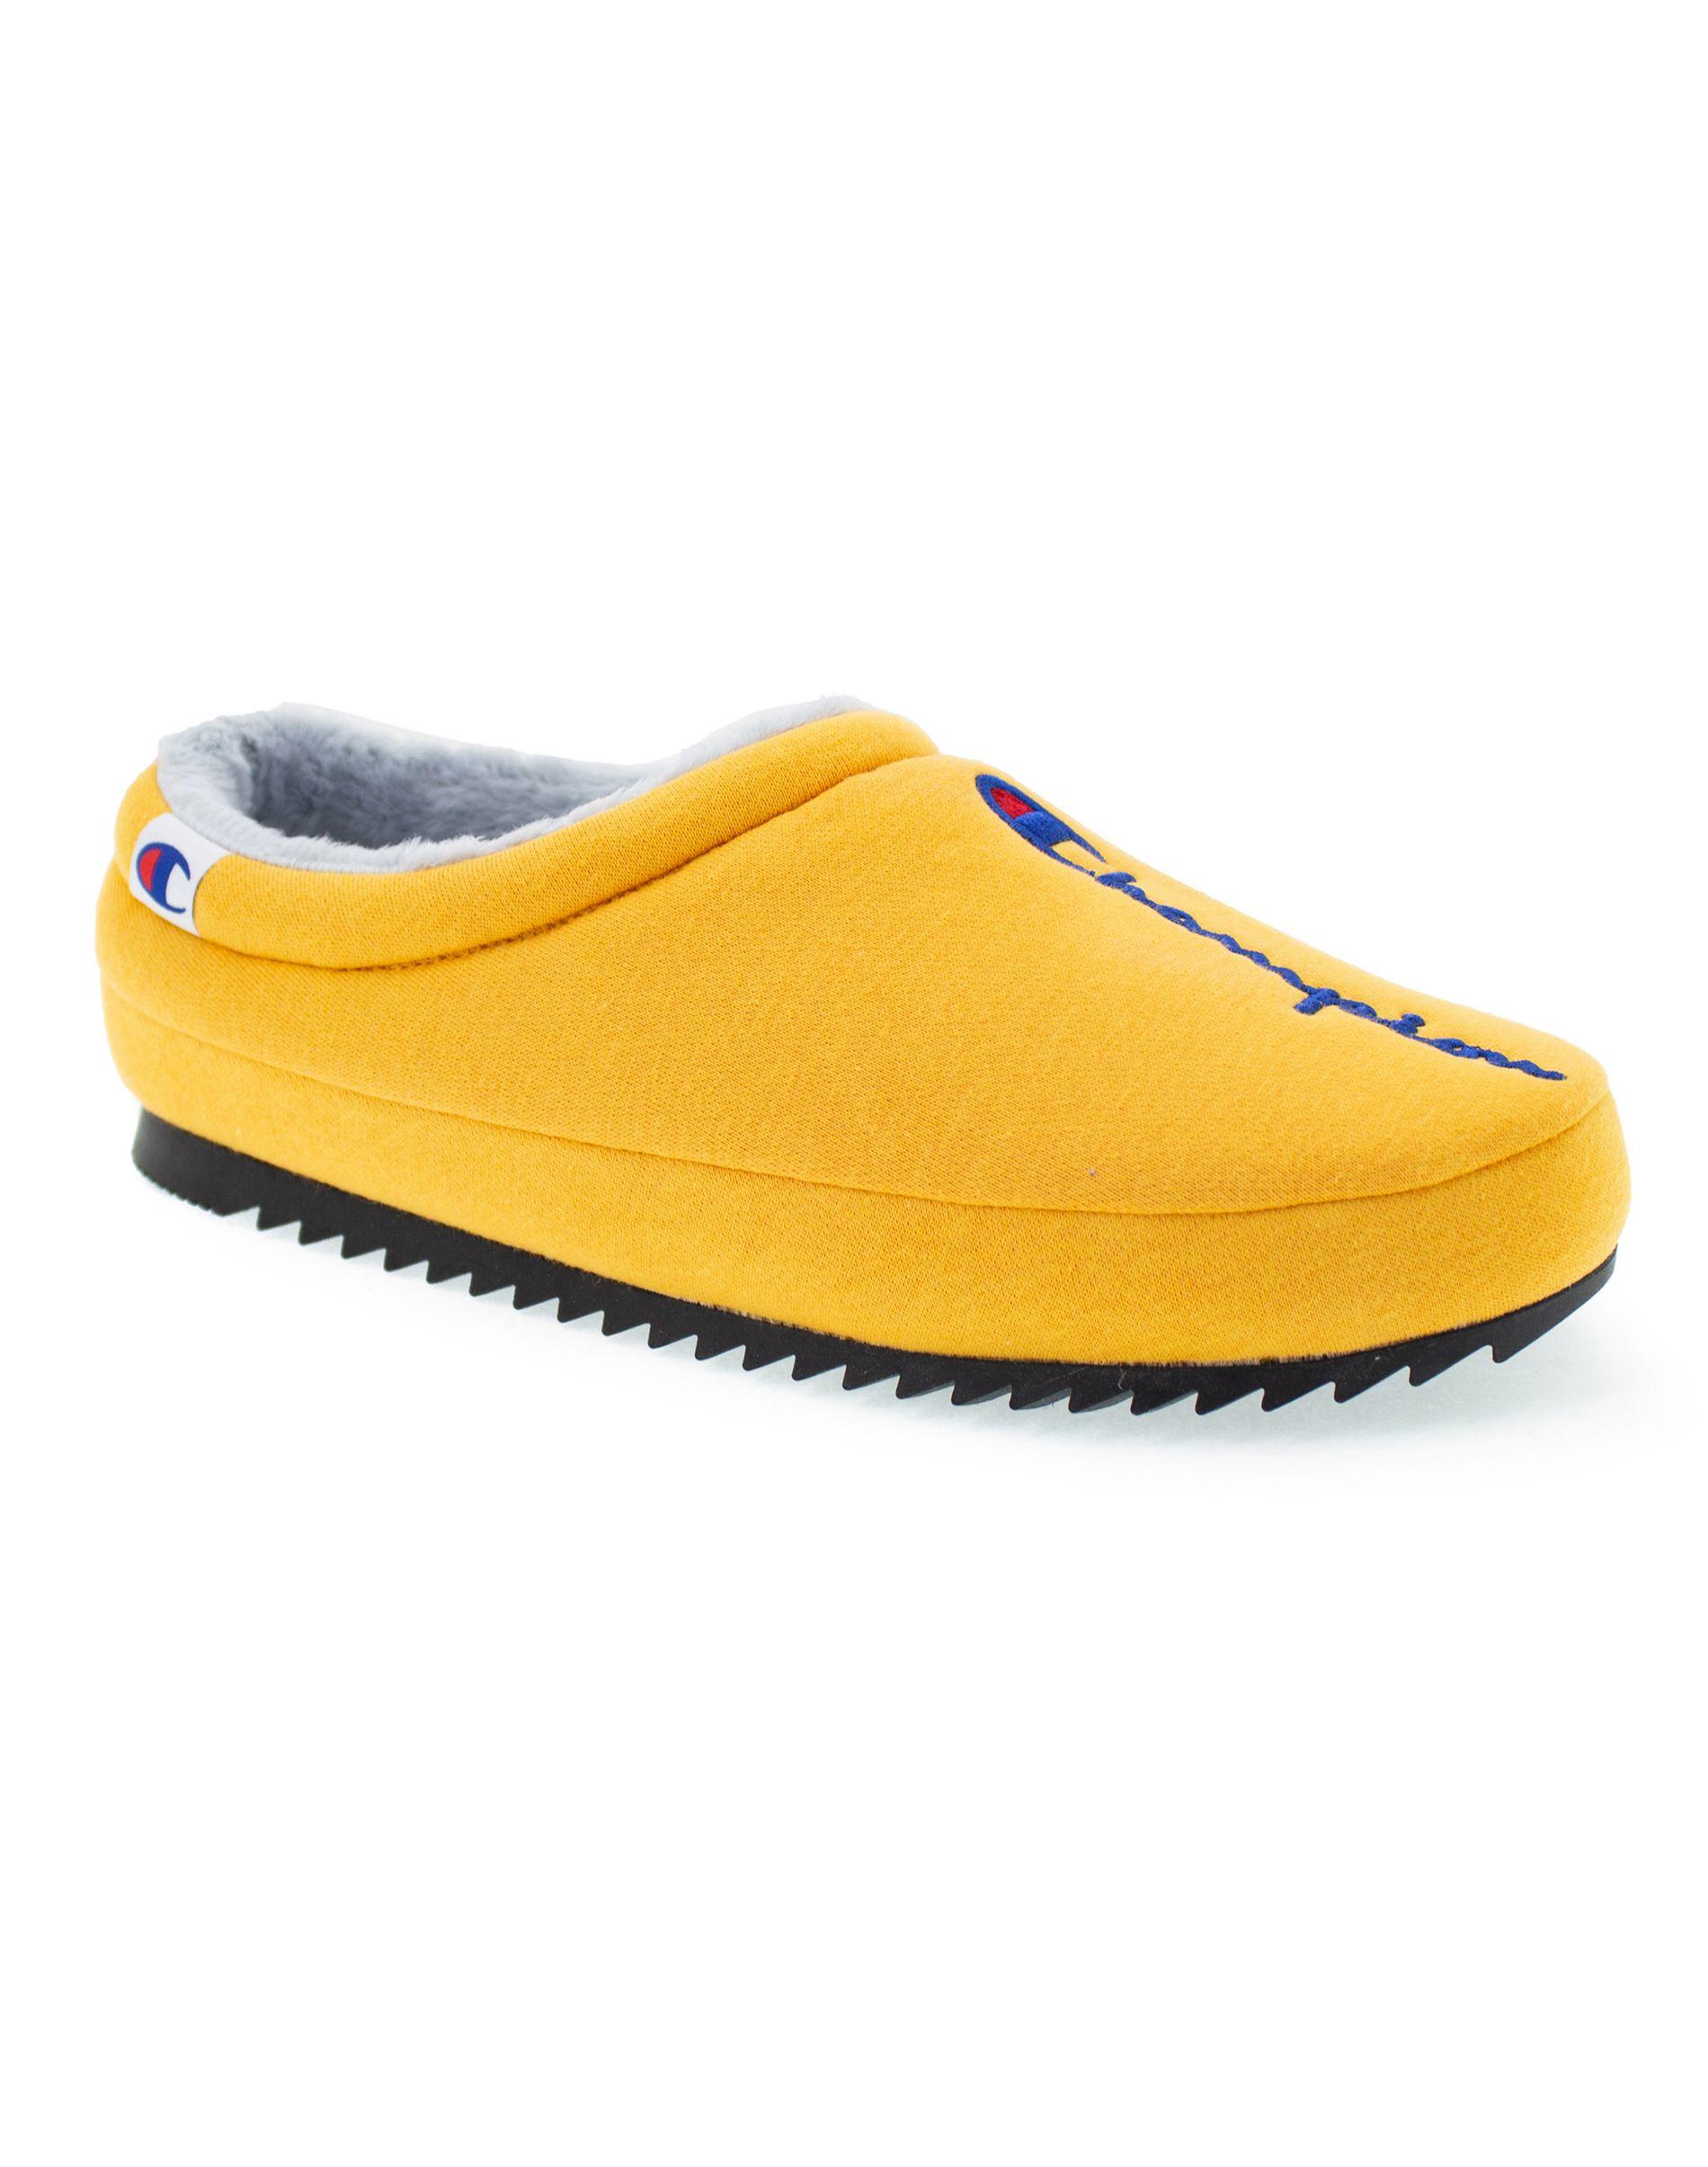 Champion Rubber Lifetm Shuffle Slippers 